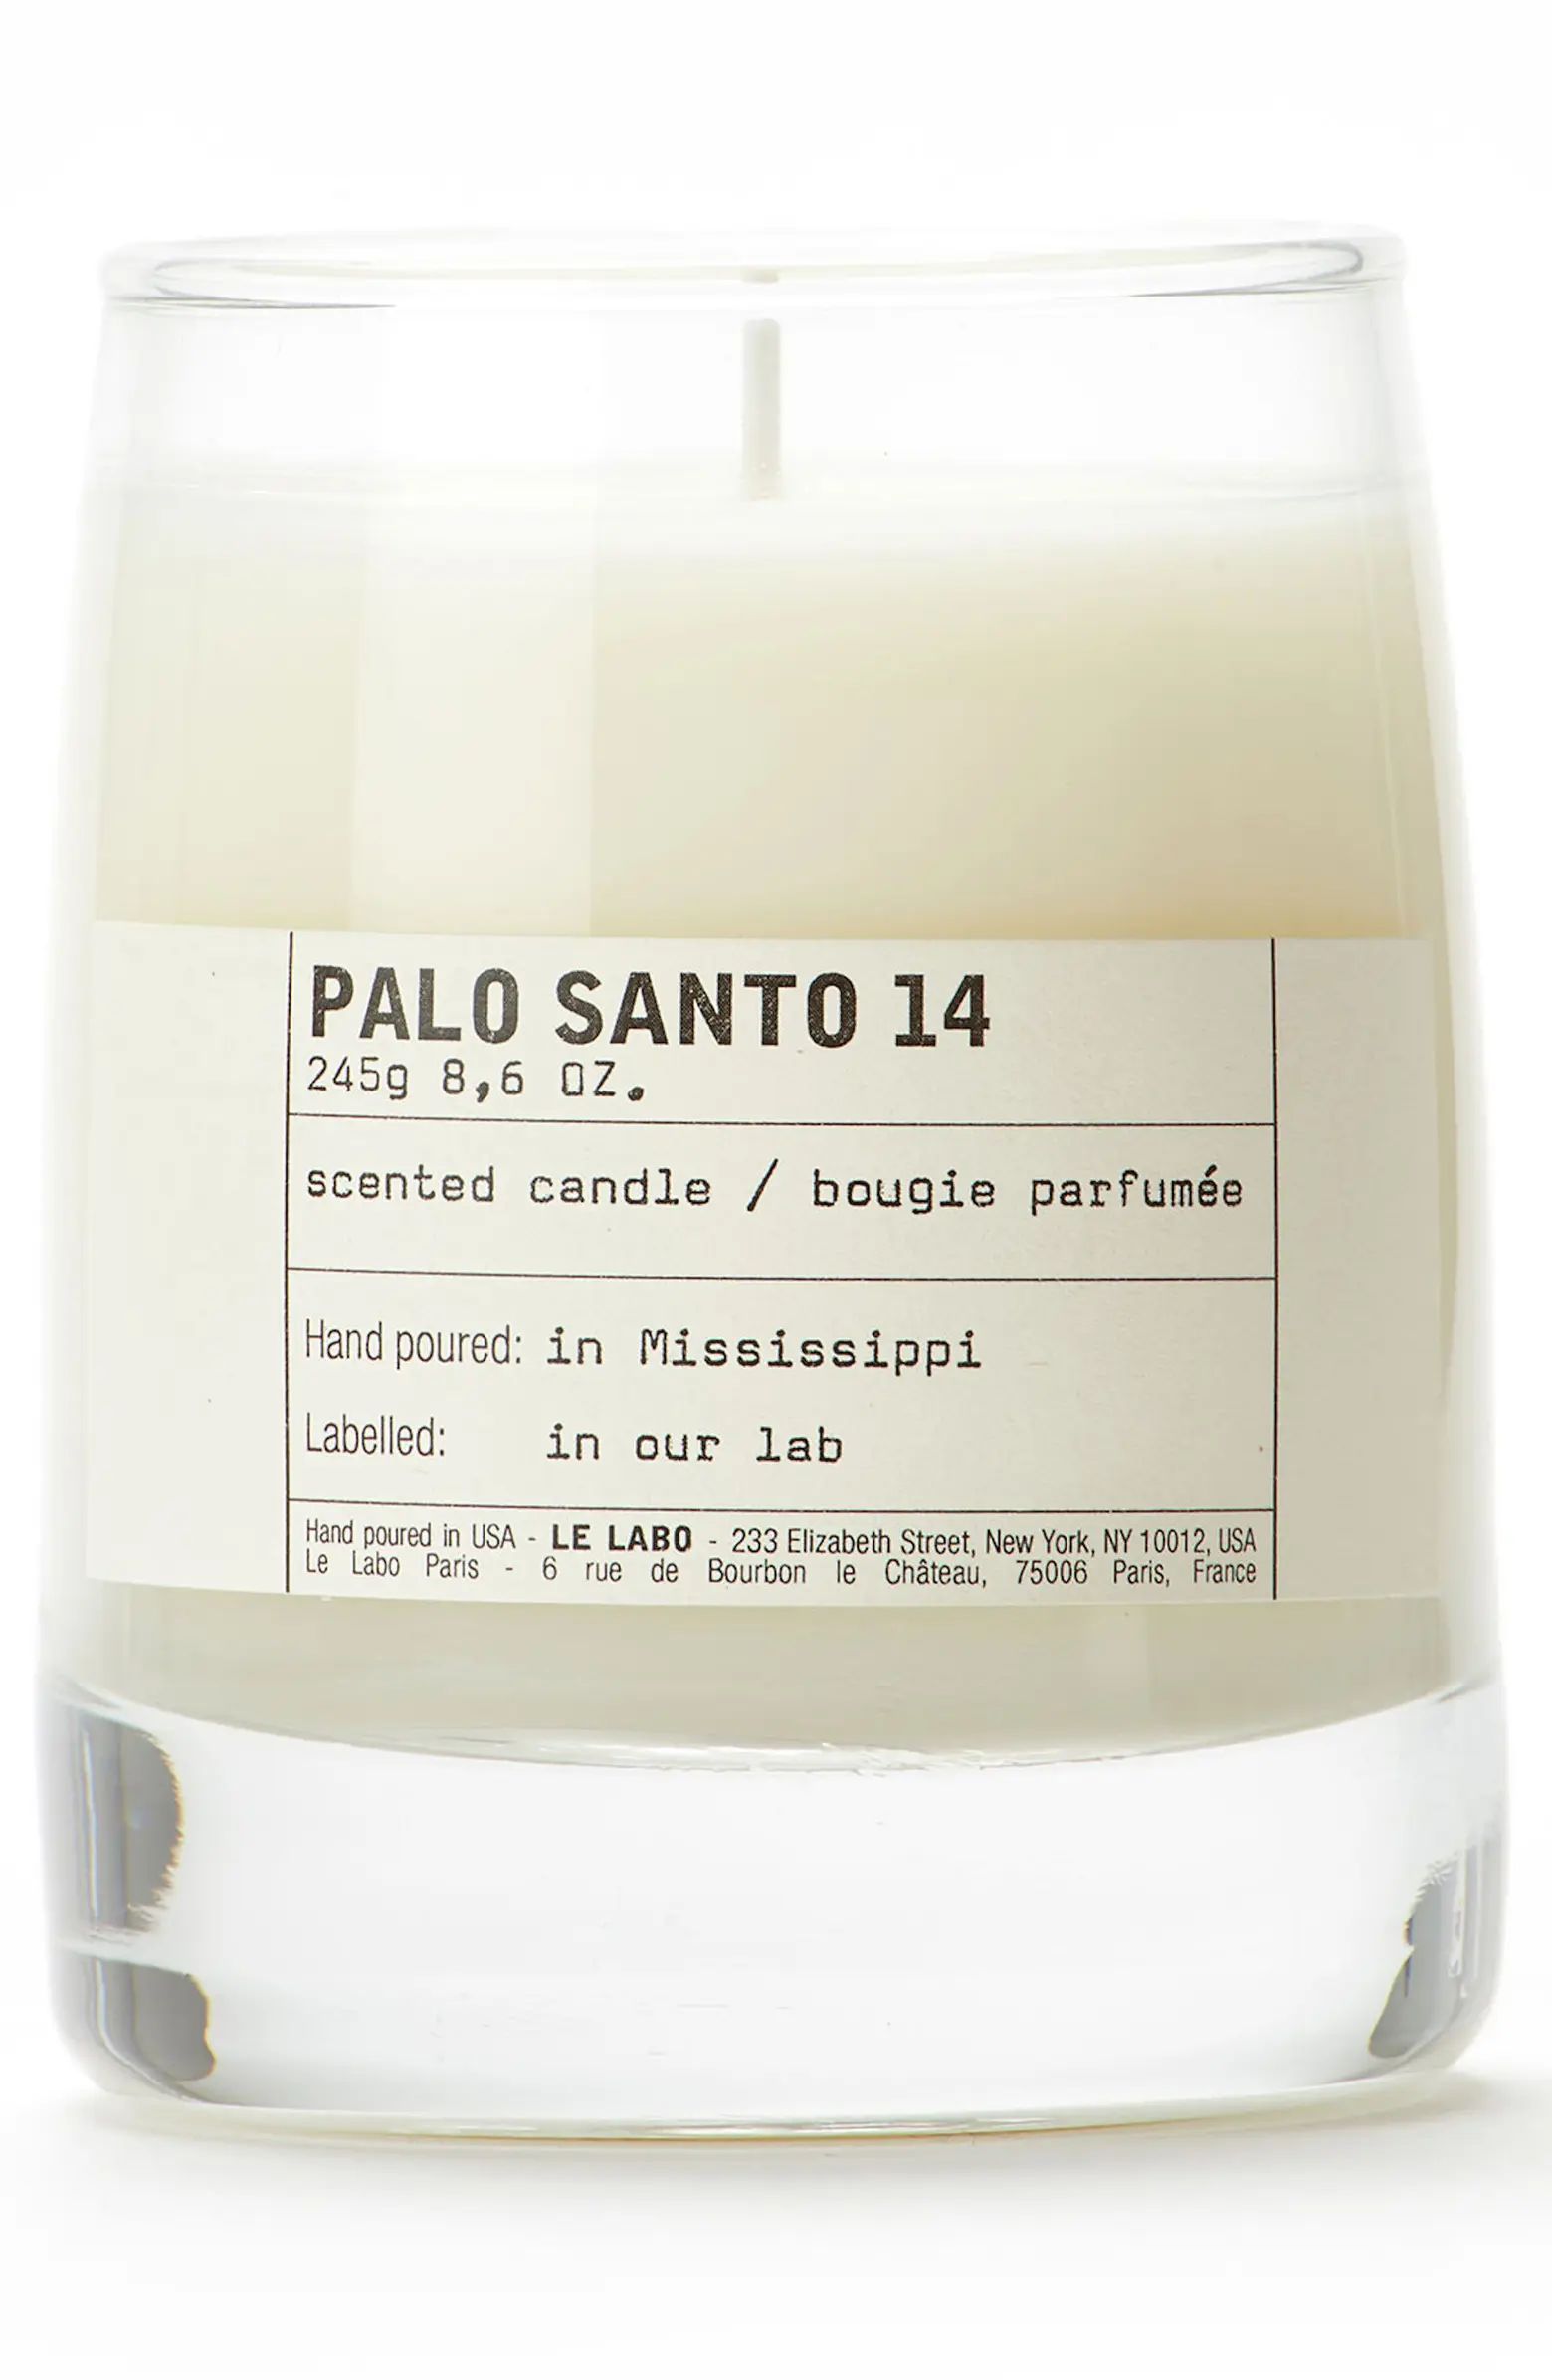 Palo Santo 14 Classic Candle | Nordstrom